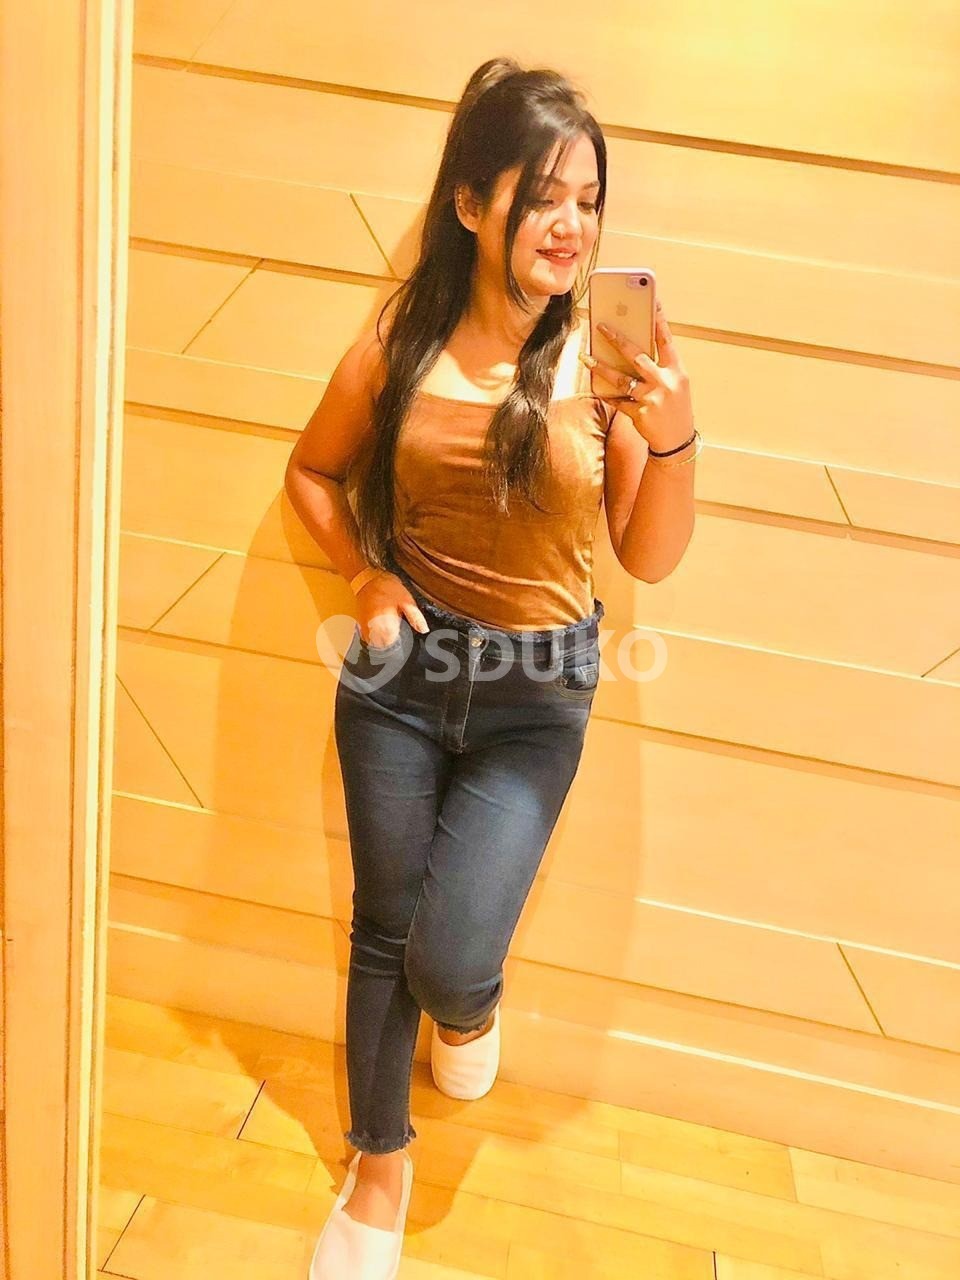 Lb Nagar 24×7 incall and outcall independent call girl service available now